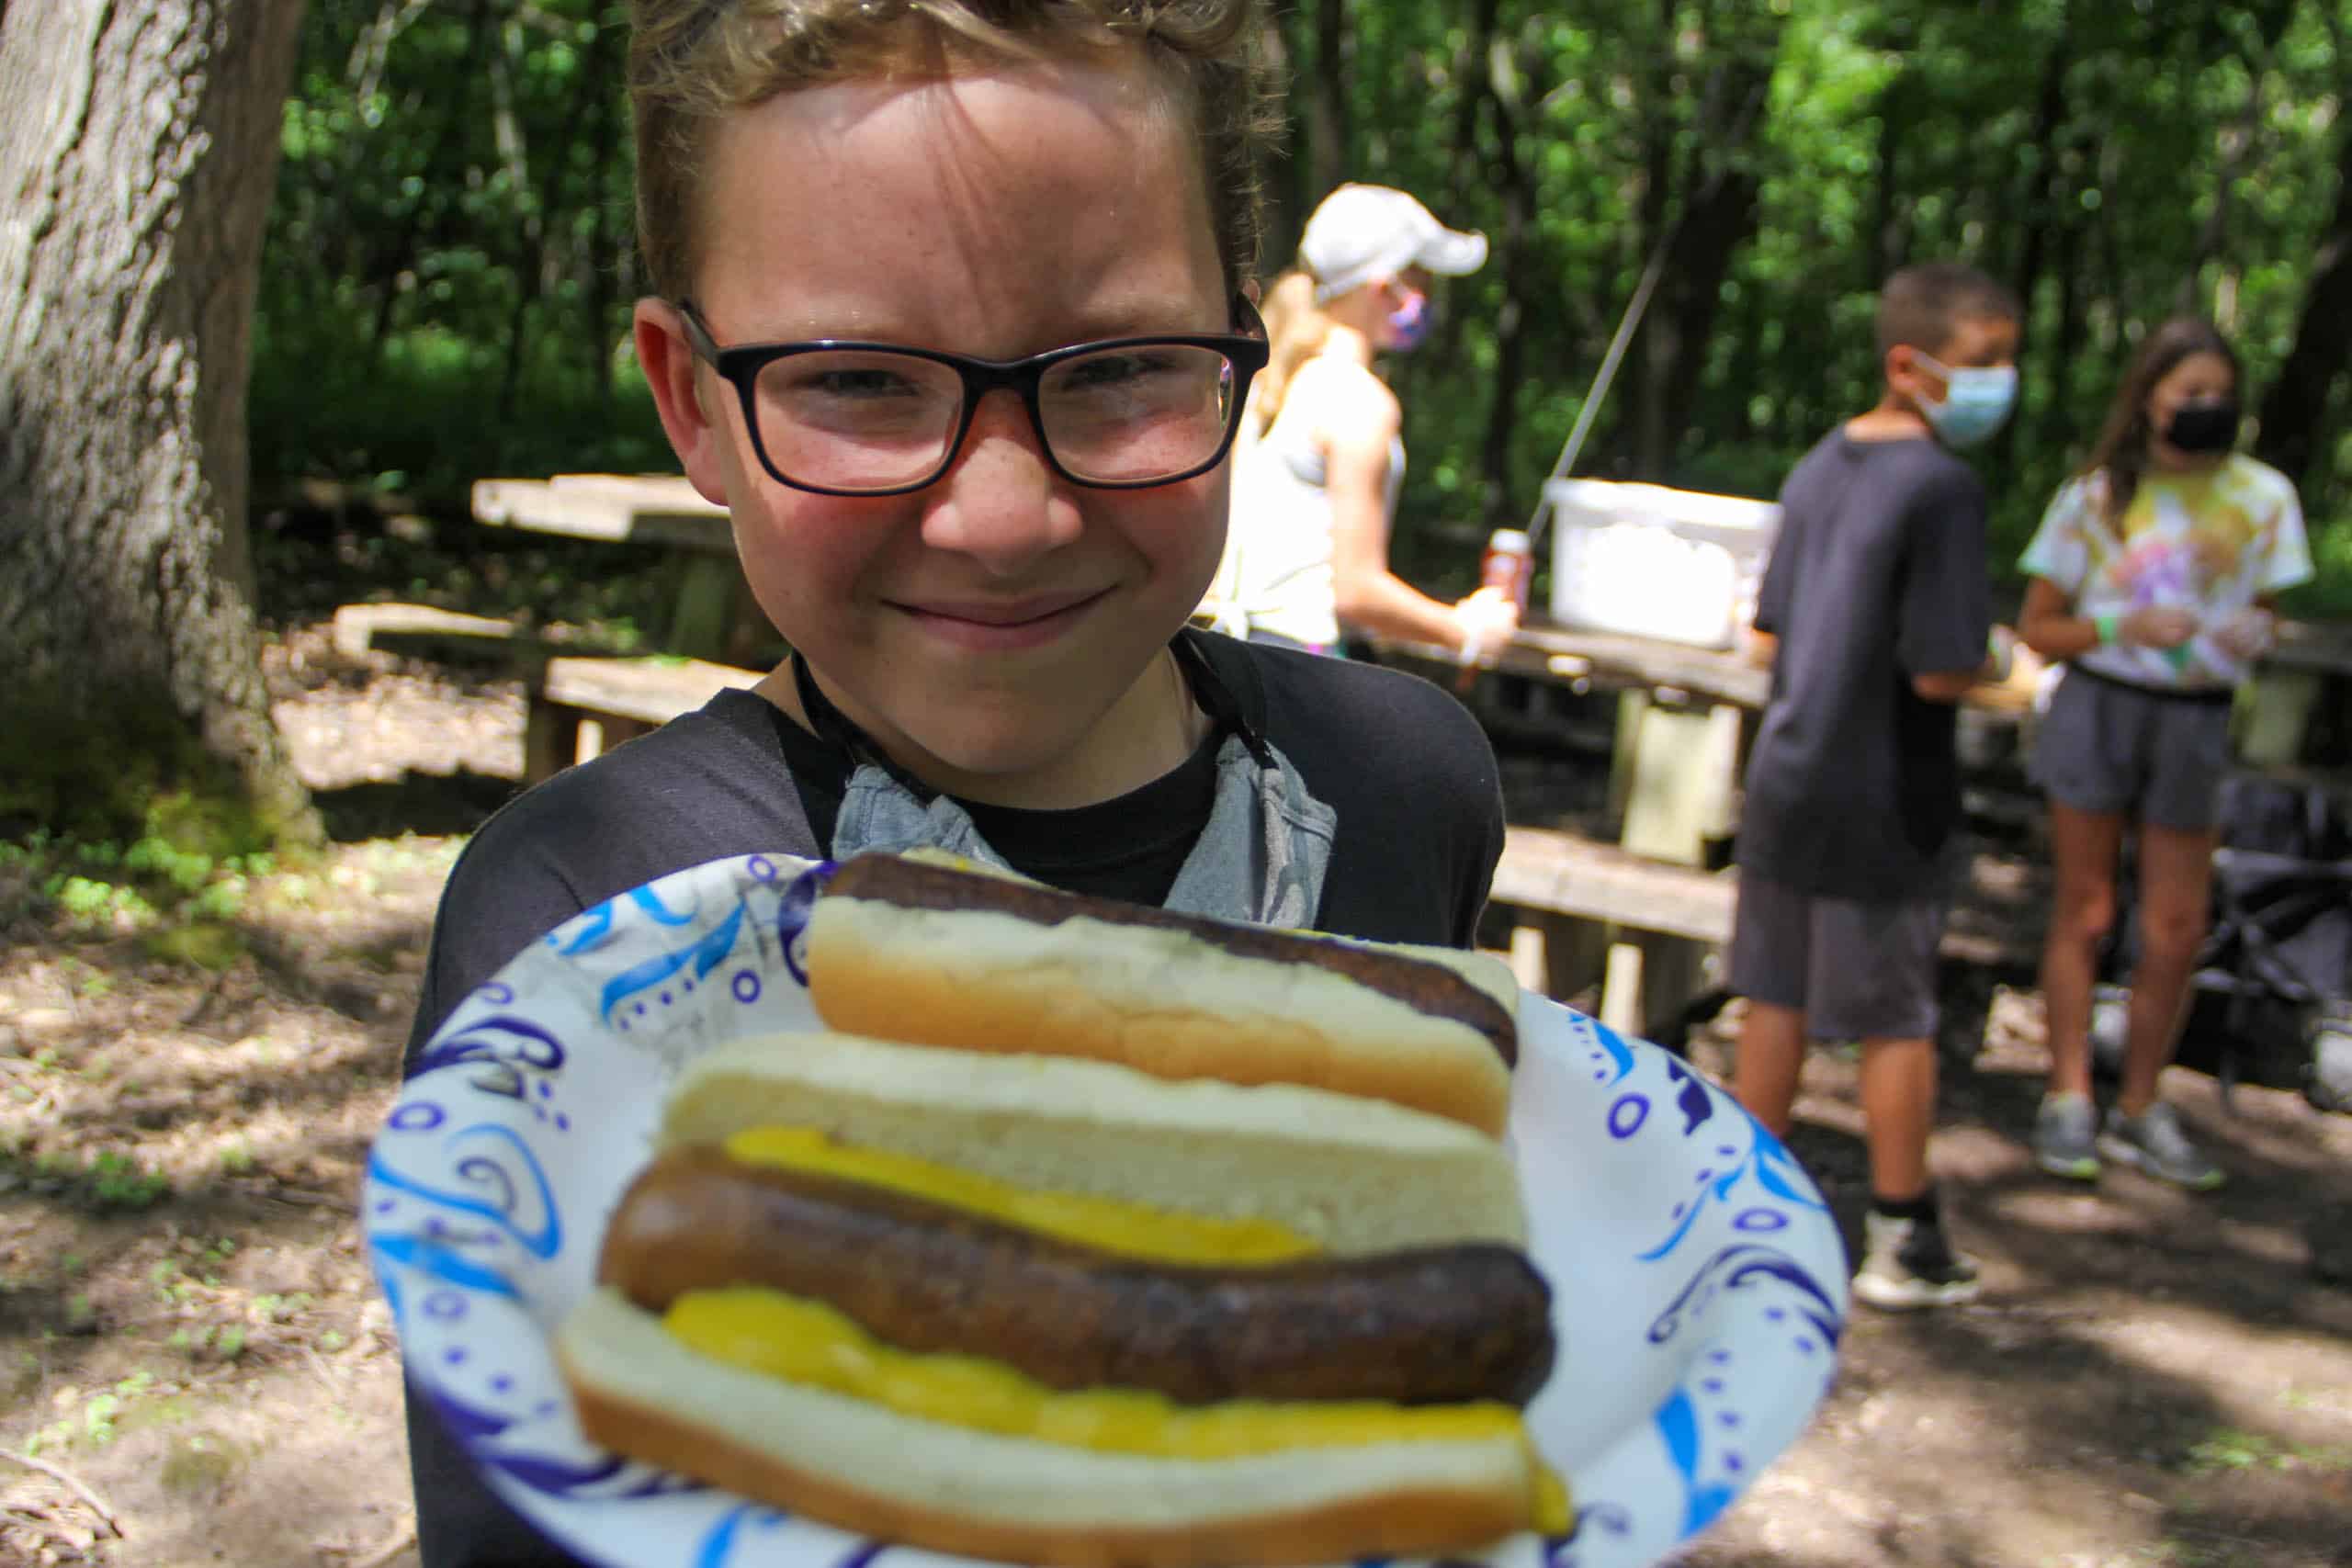 A boy at summer camp in Iowa holding a plate of hot dogs.